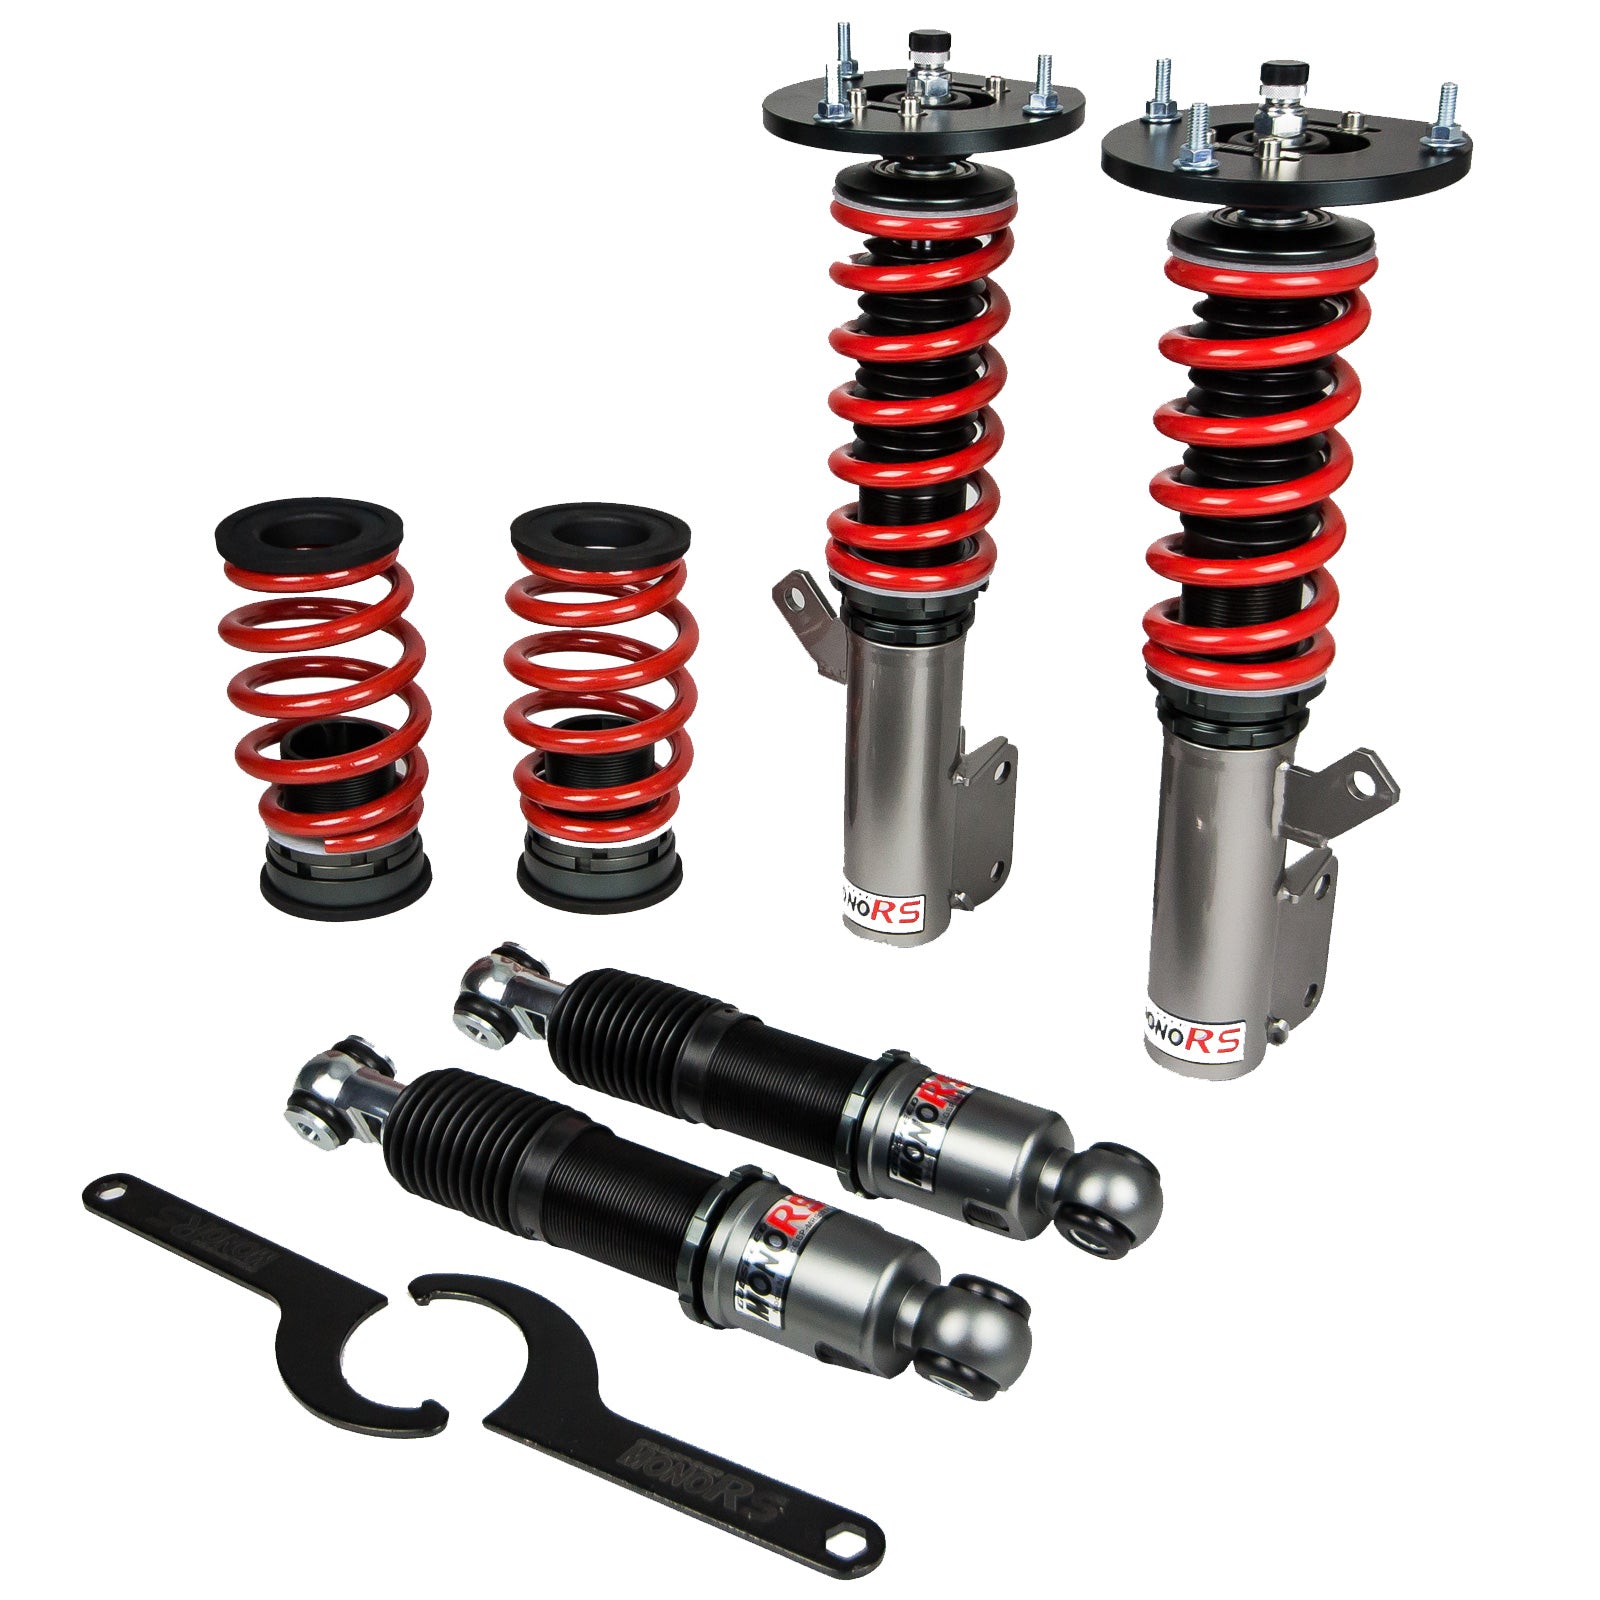 Godspeed MRS1770-A MonoRS Coilover Lowering Kit, 32 Damping Adjustment, Ride Height Adjustable